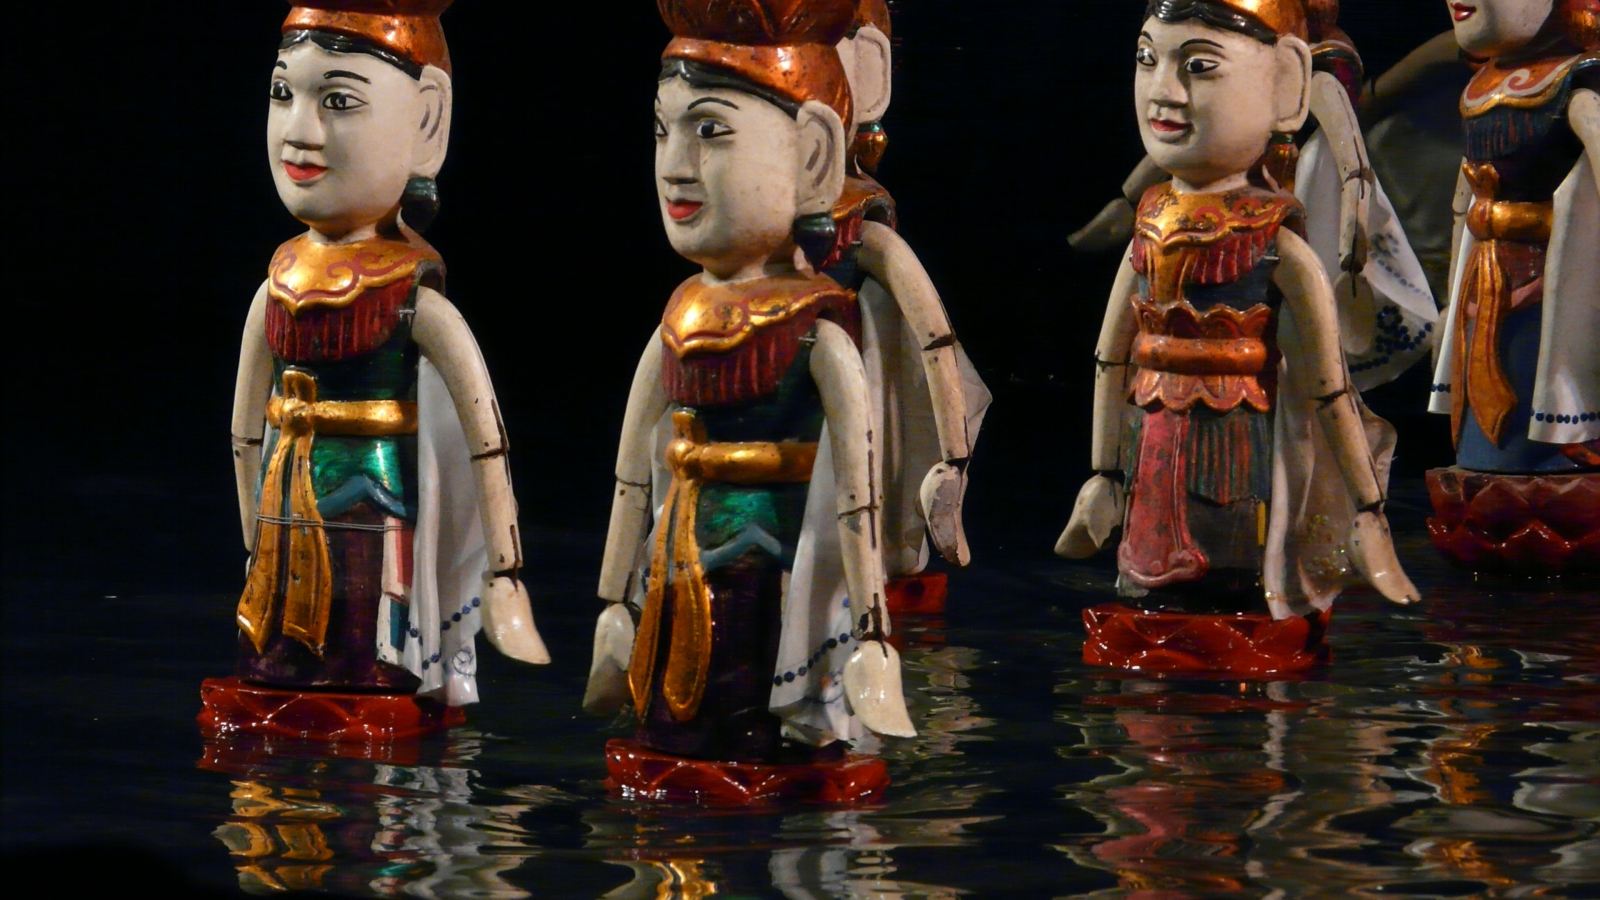 water puppet theater